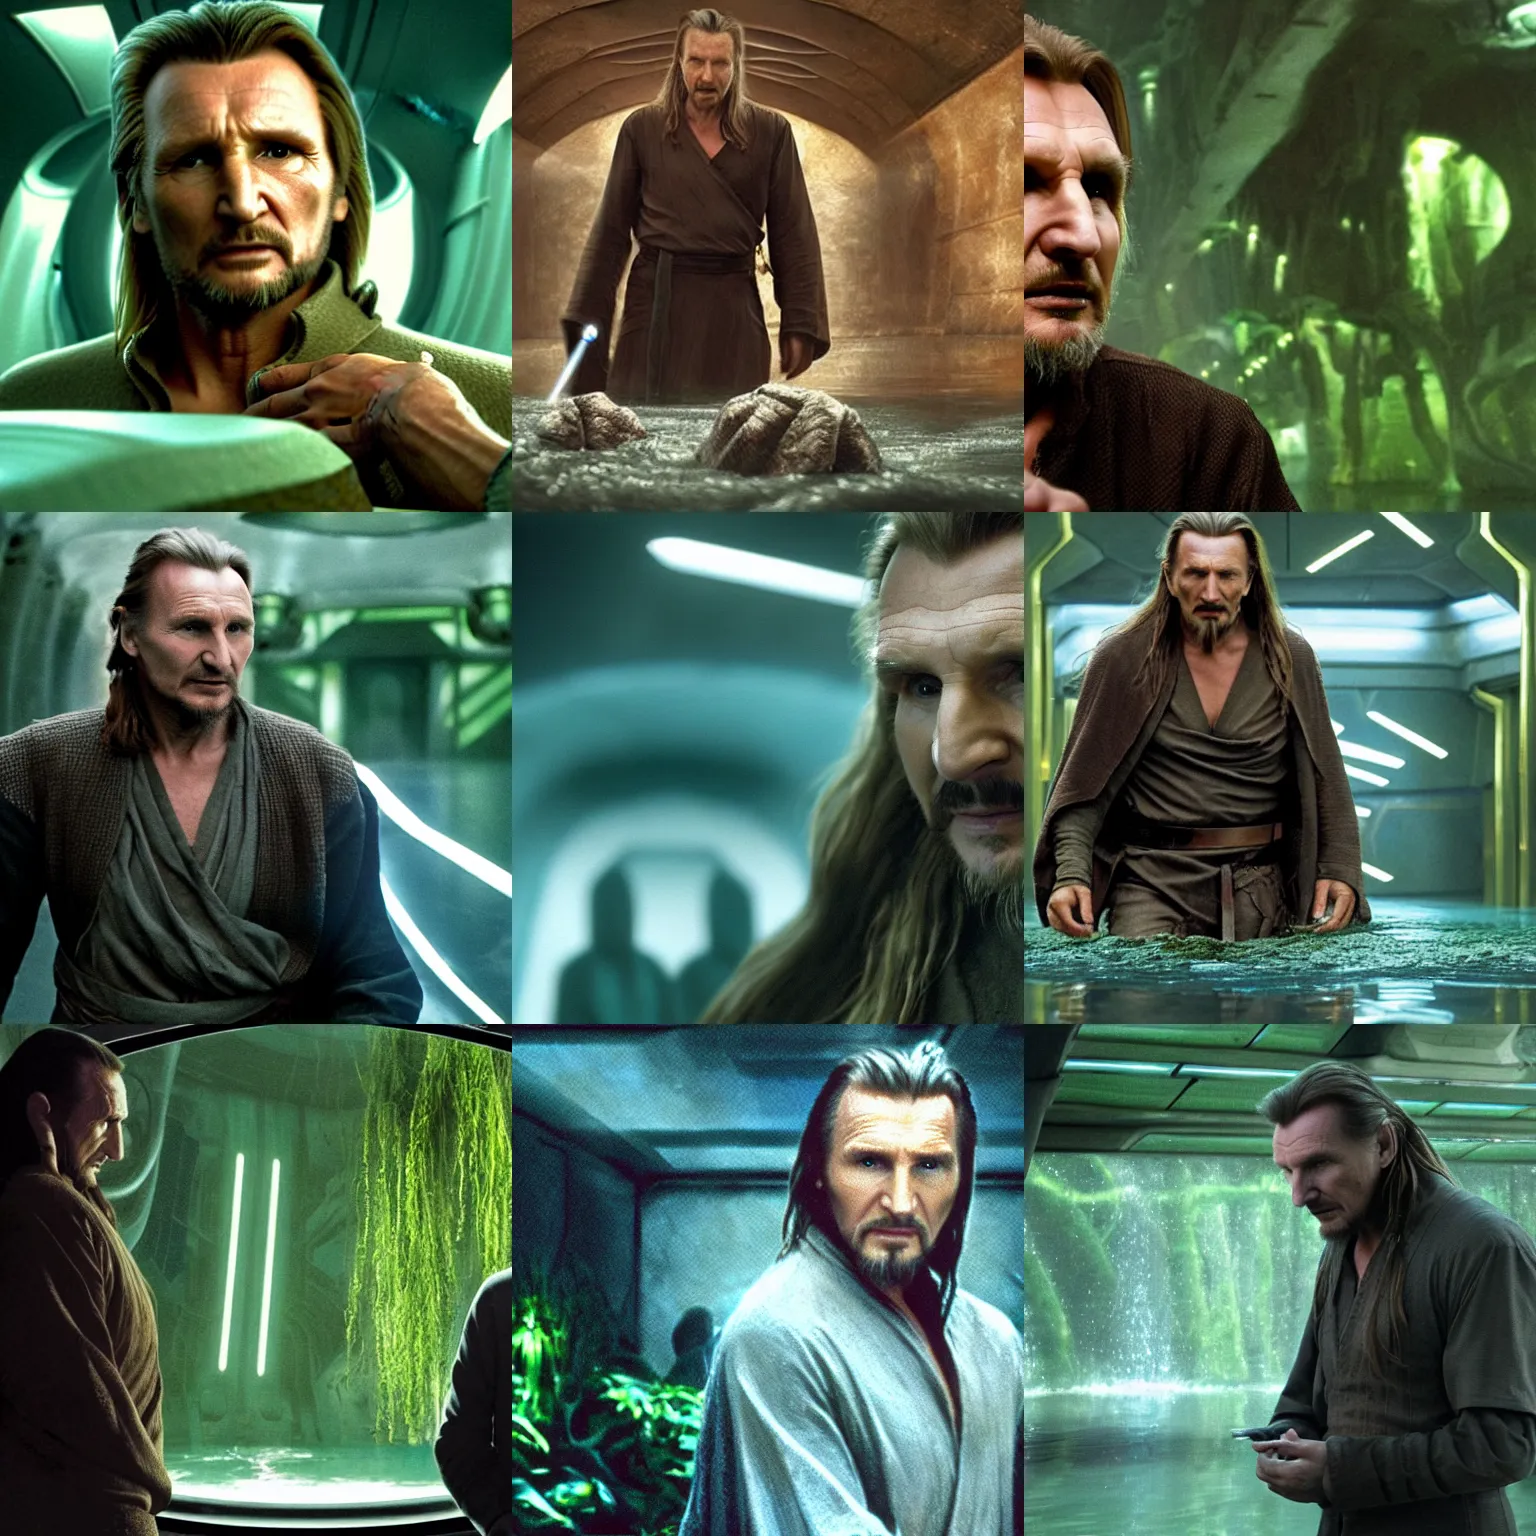 Prompt: liam neeson as qui - gon jinn, alone, in an empty dark flooded spaceship interior, overgrown with aquatic plants